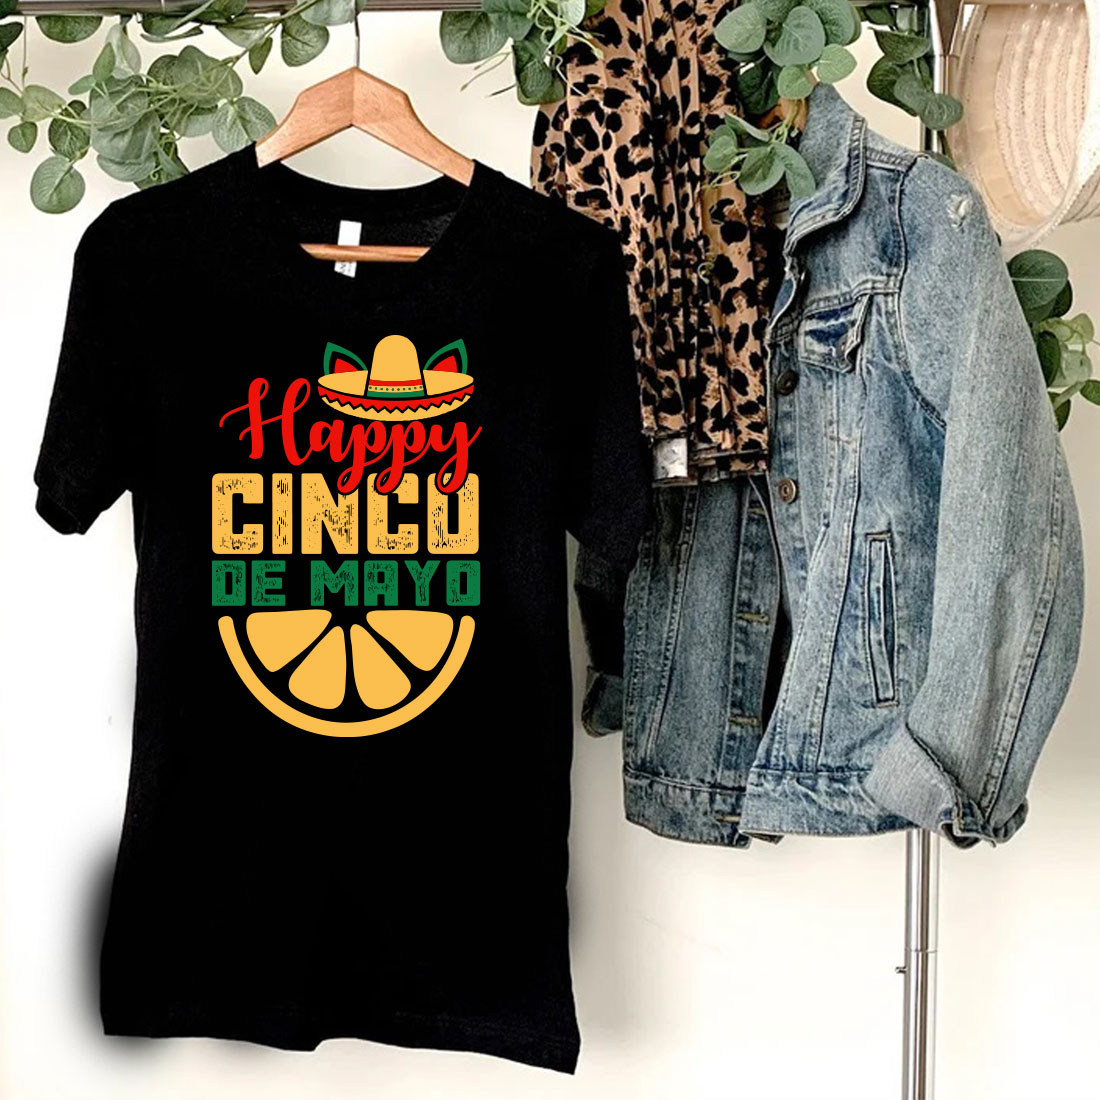 T - shirt that says happy cinco de mayo next to a jean jacket.